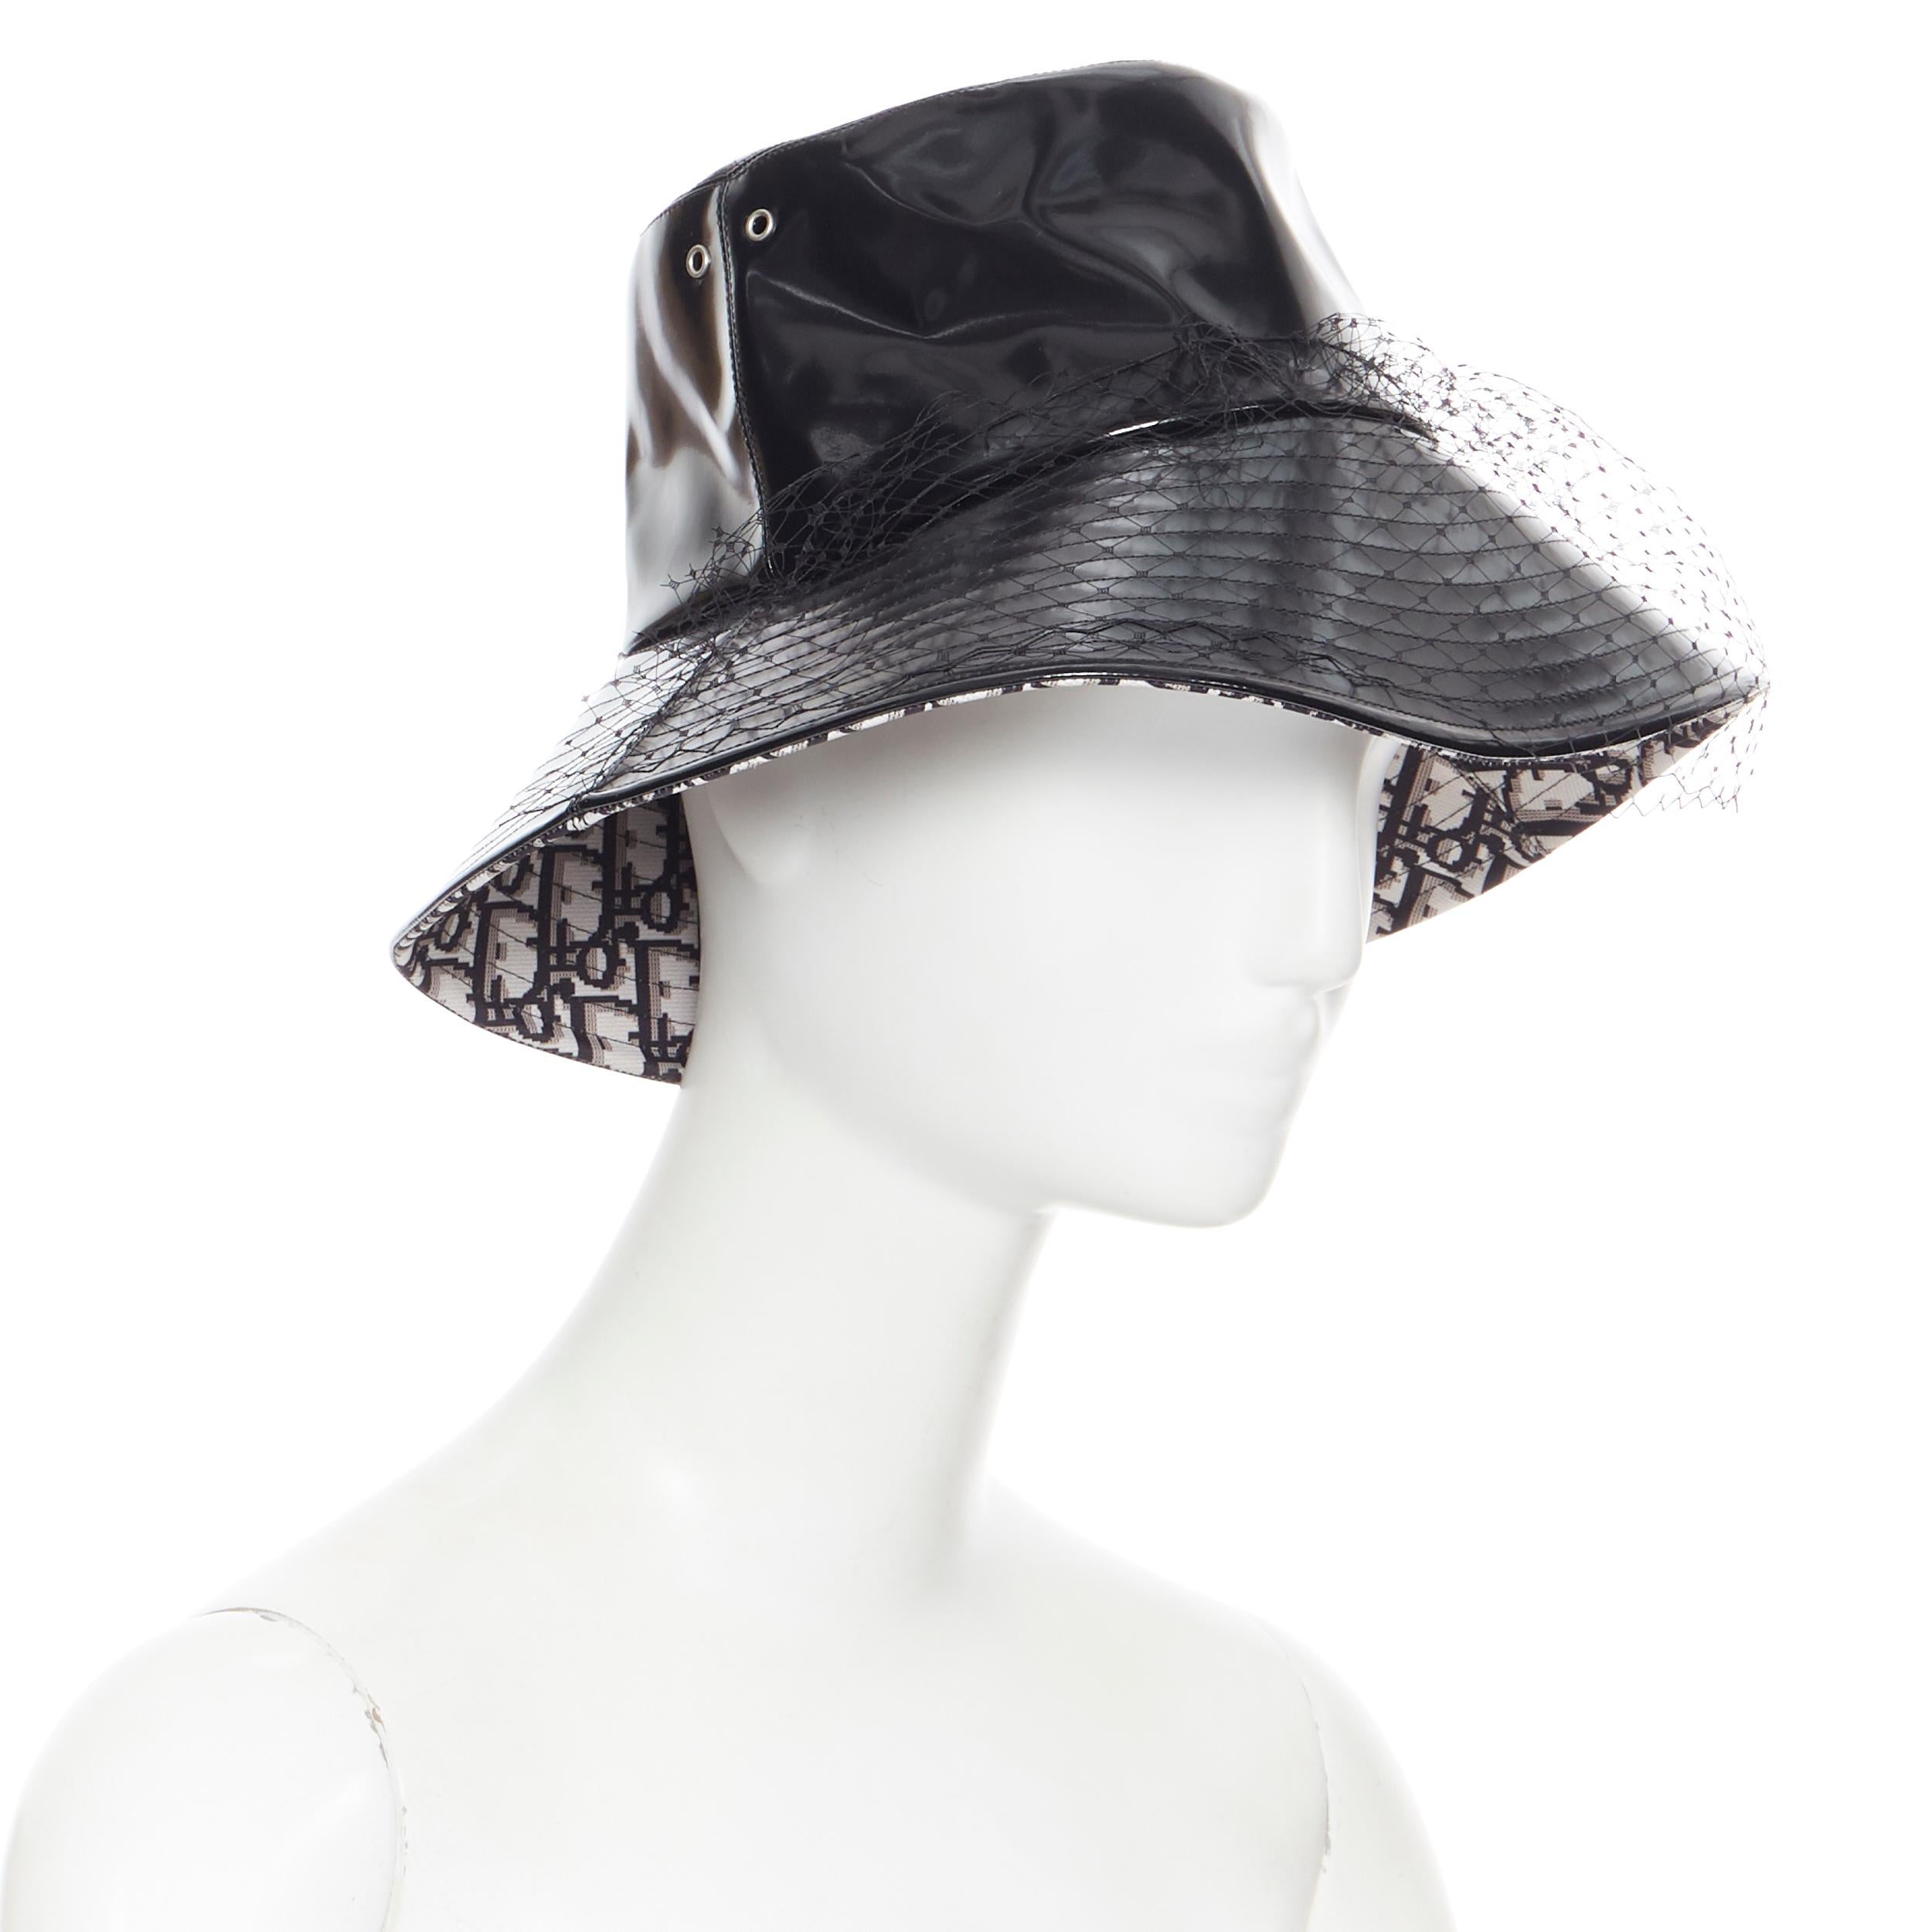 CHRISTIAN DIOR black faux leather net mesh trimmed monogram oblique bucket hat
Brand: Dior
Designer: Maria Grazia Chiuri
Model Name / Style: Bucket hat
Material: Other
Color: Black
Pattern: Solid
Made in: France

CONDITION: 
Condition: Excellent,